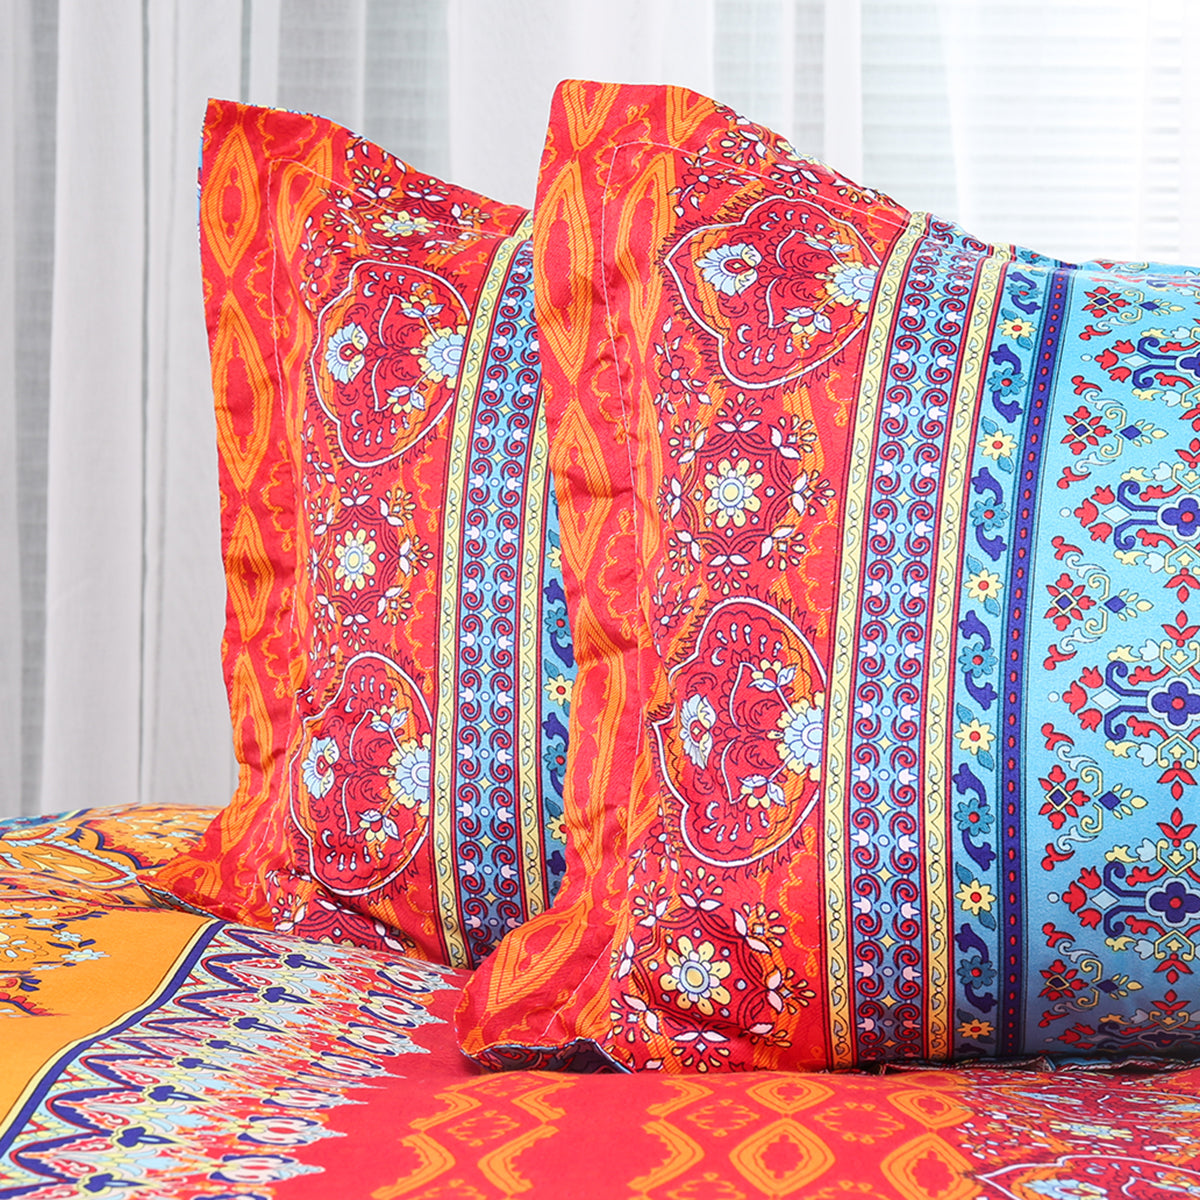 Bohemian style Duvet Cover with 2 Pillowcases